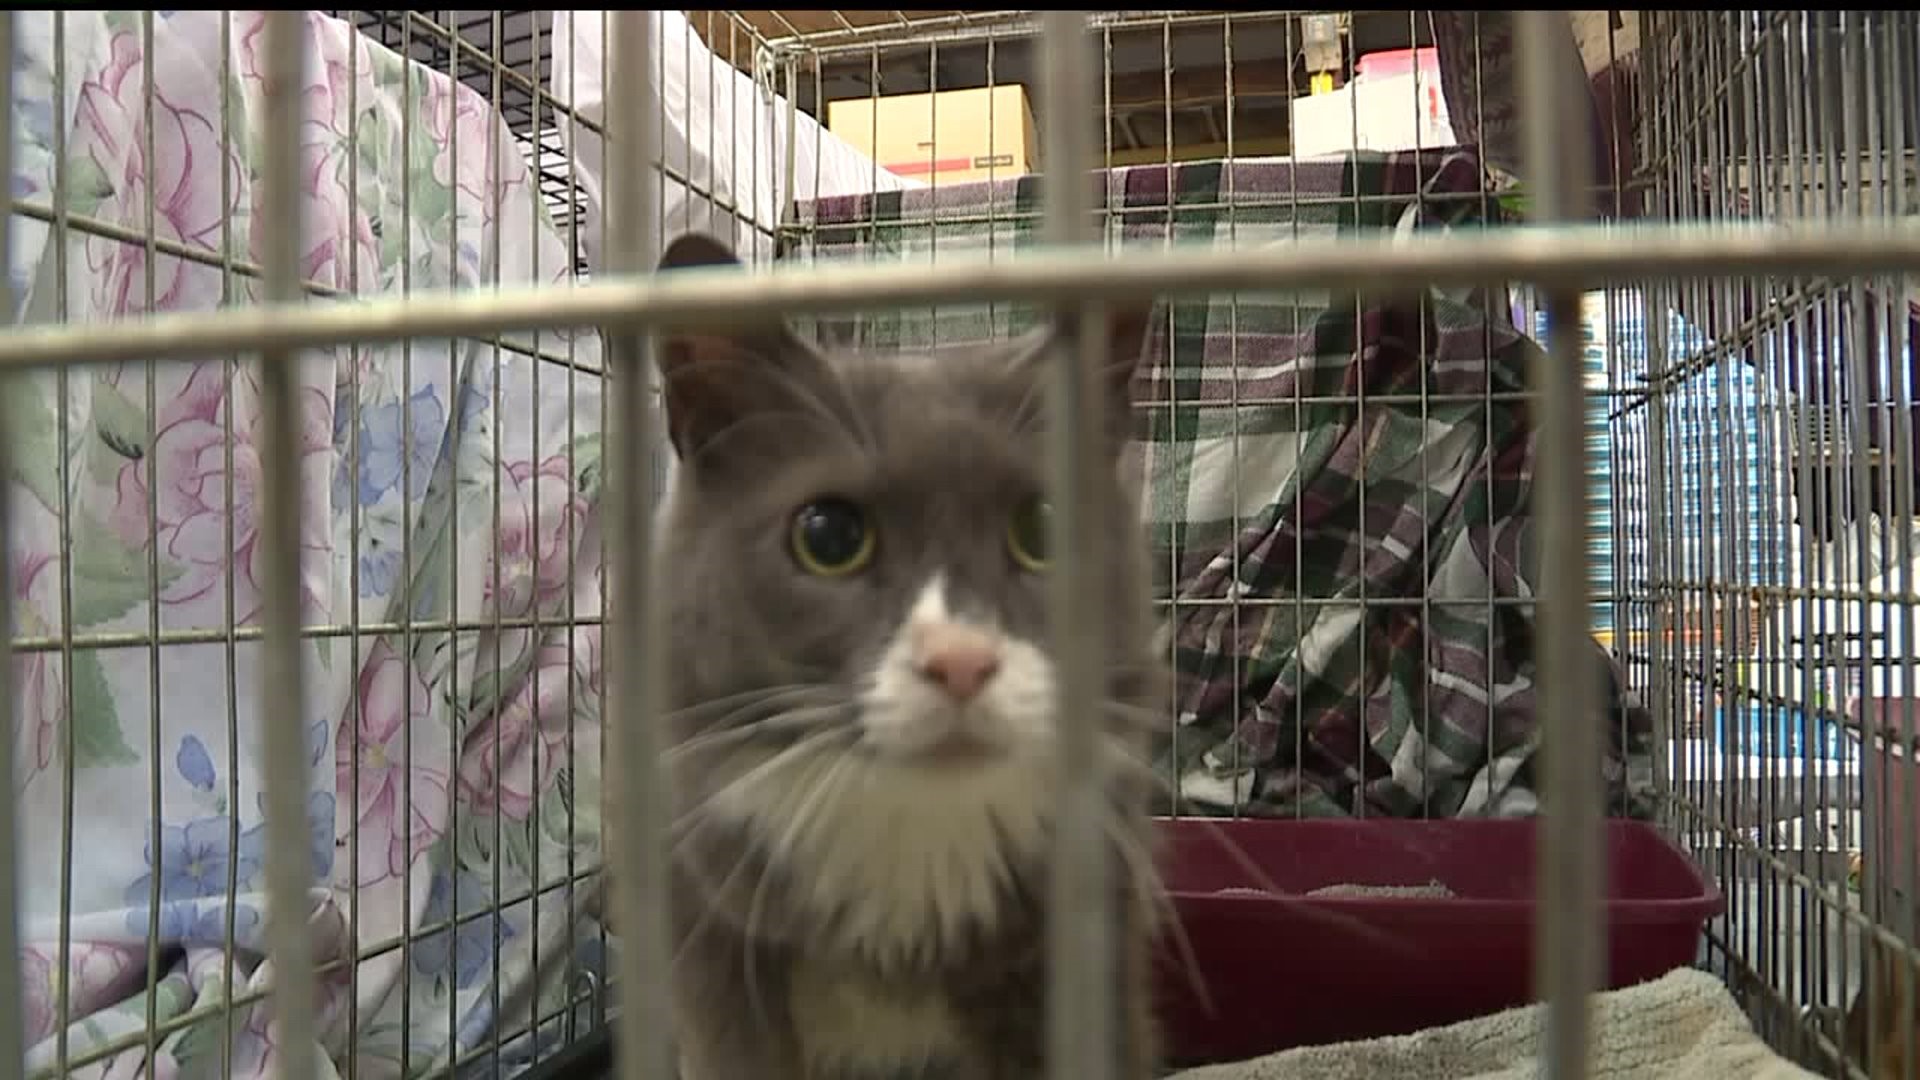 About 100 cats rescued from house in Lebanon Co., need loving homes